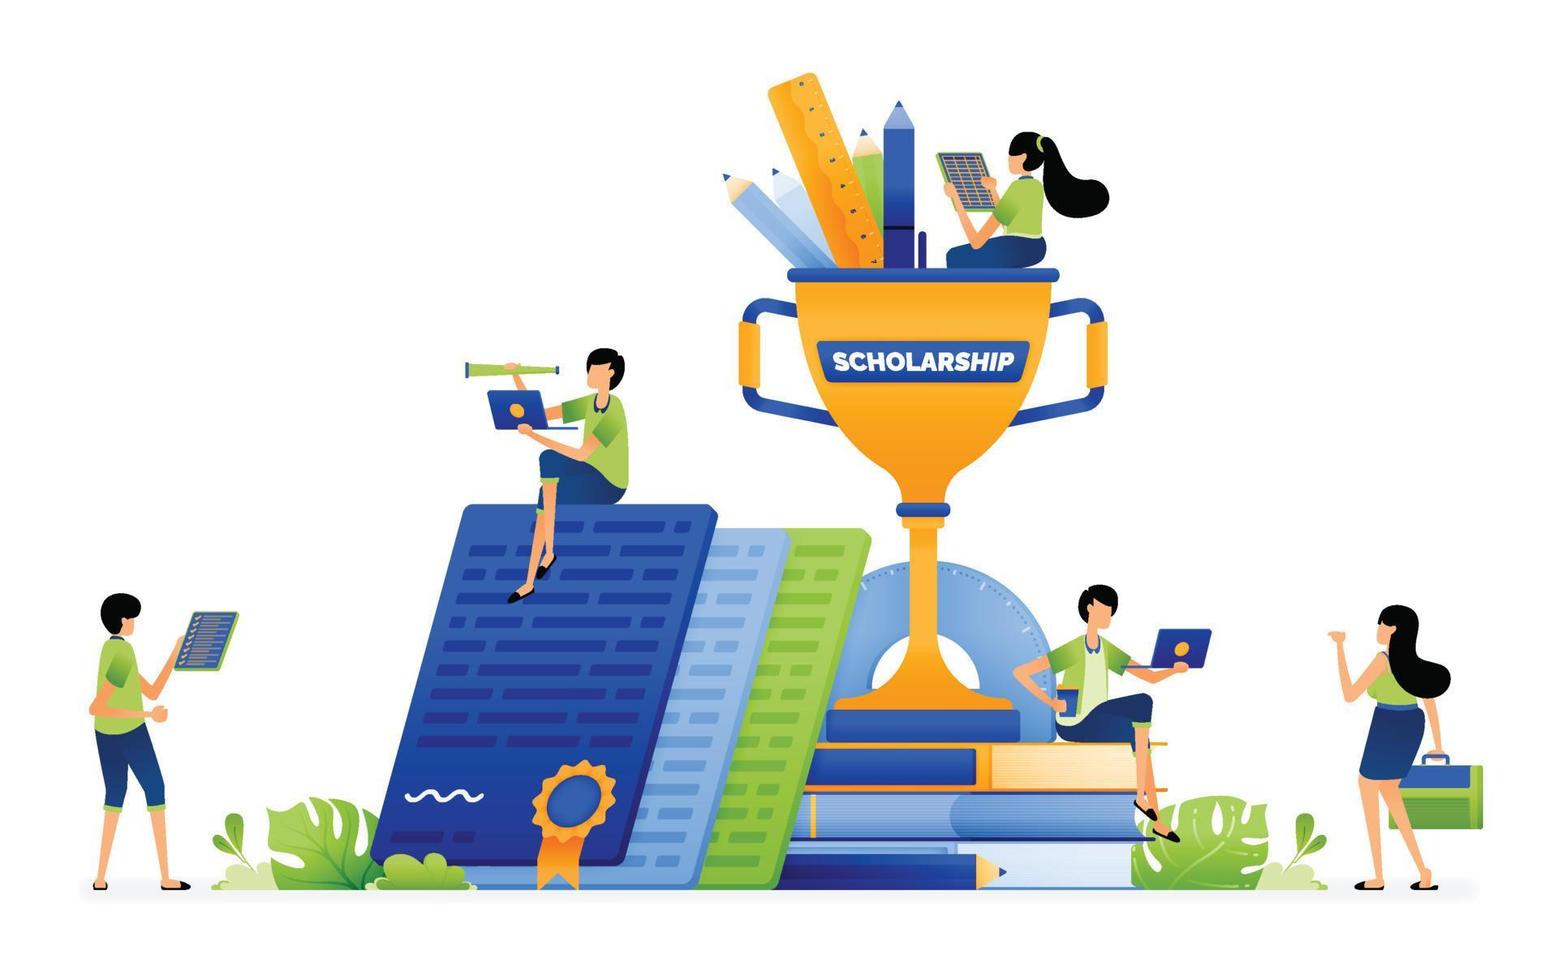 Design of Trophies and certificates as proof of achievement and effort to get educational scholarships. Illustration for landing pages websites posters banners mobile apps web social media ads etc vector